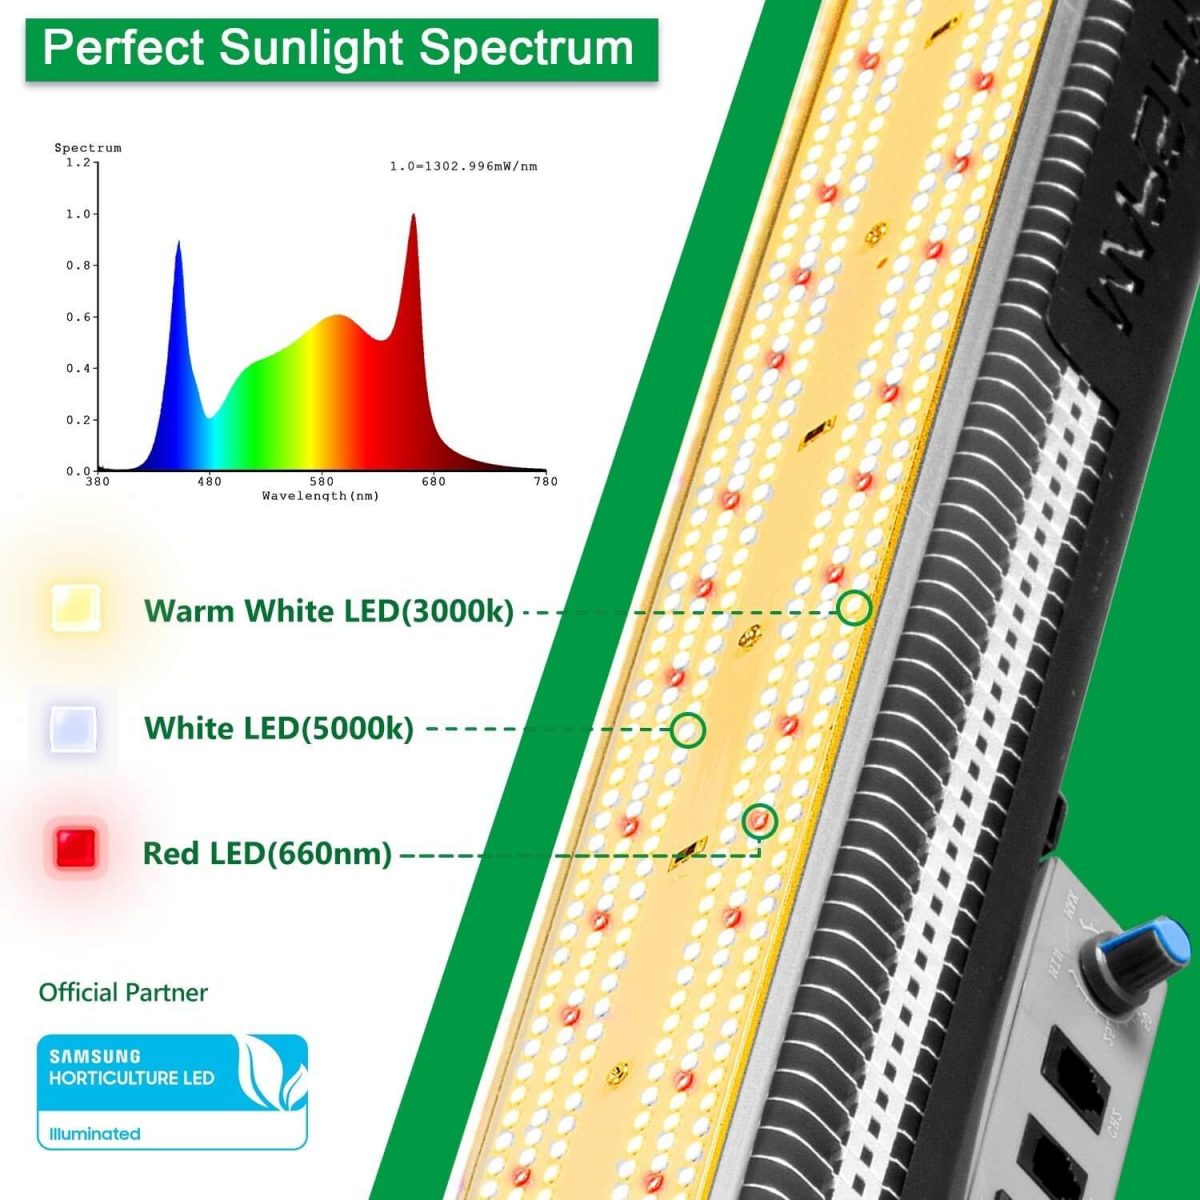 Perfect sunlike spectrum, SP3000 is with warm white, white and red led